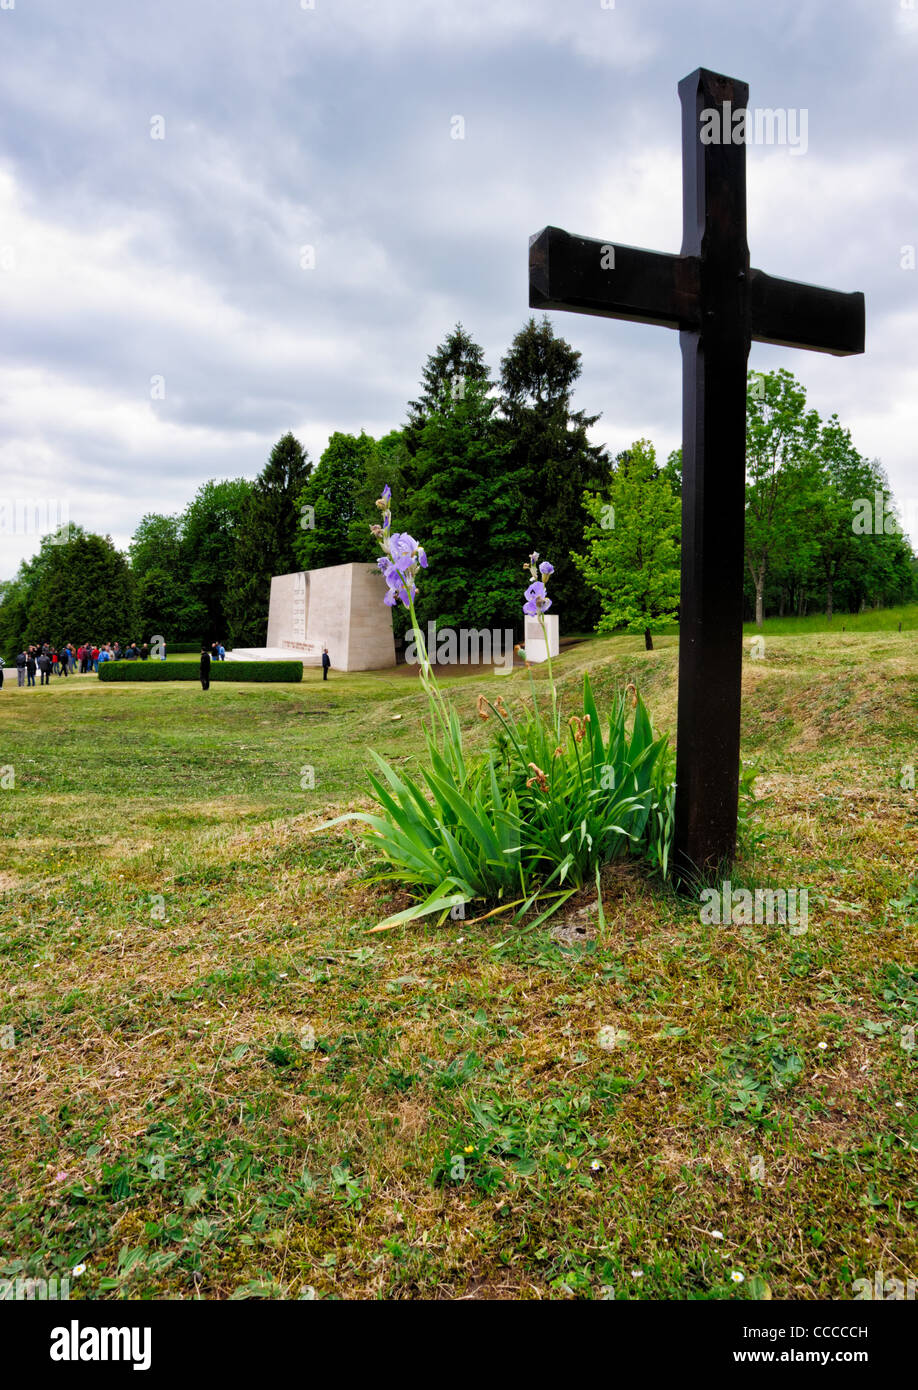 Verdun, France. The grave of a German soldier from WWII overlooks the Jewish soldiers' memorial at the military cemetery. Stock Photo